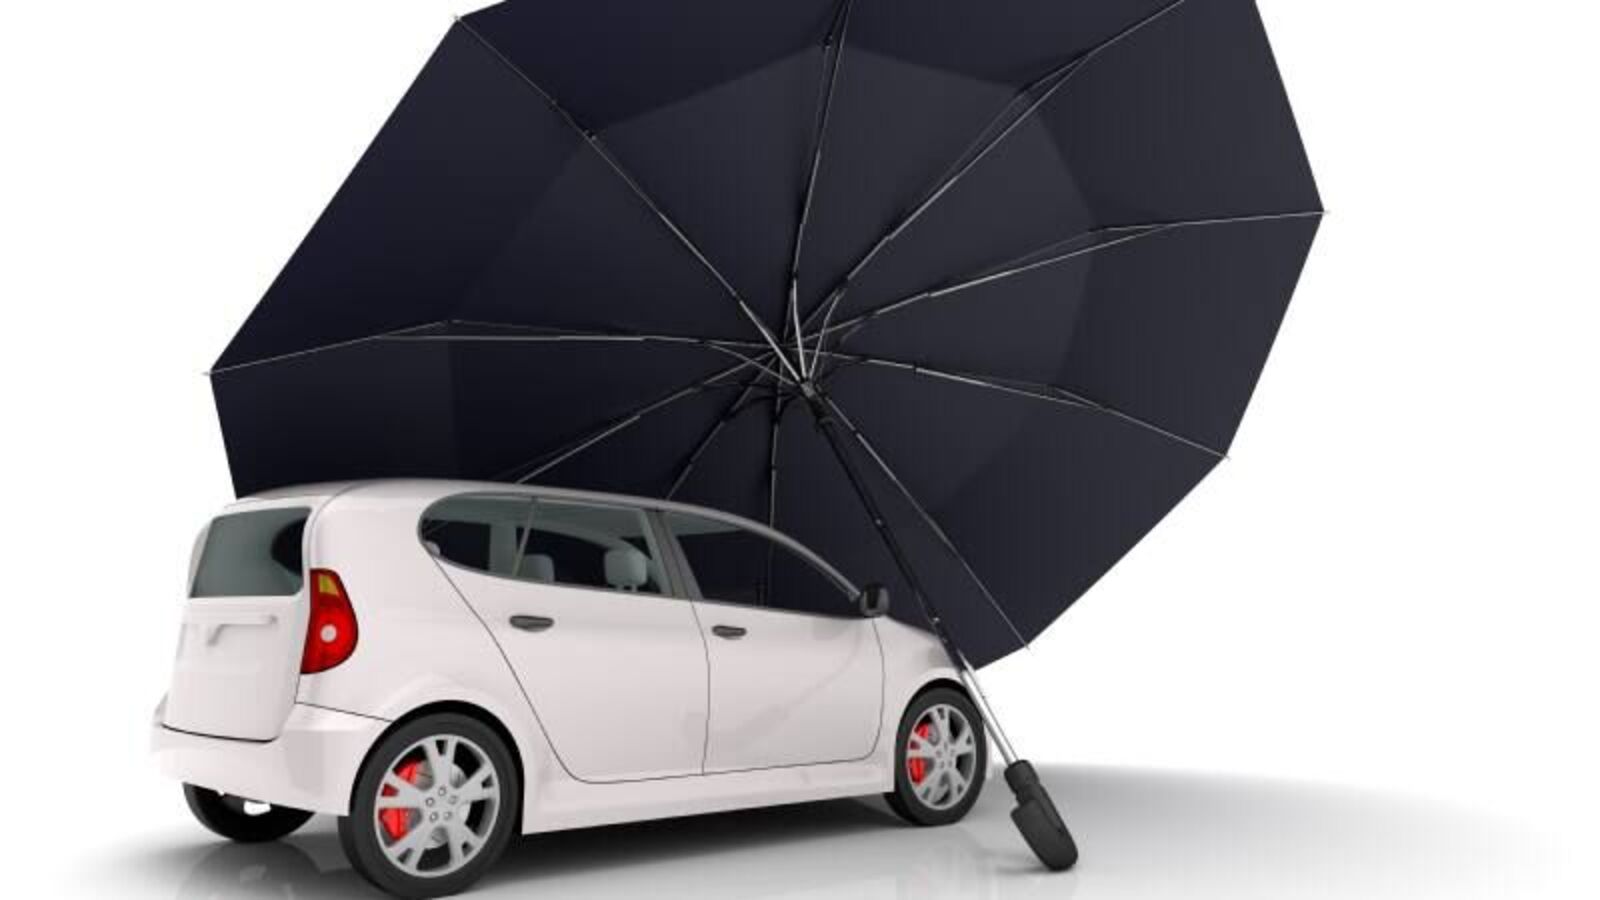 Car Insurance: How to ensure comprehensive coverage with monsoon add-ons? Here are 6 ways